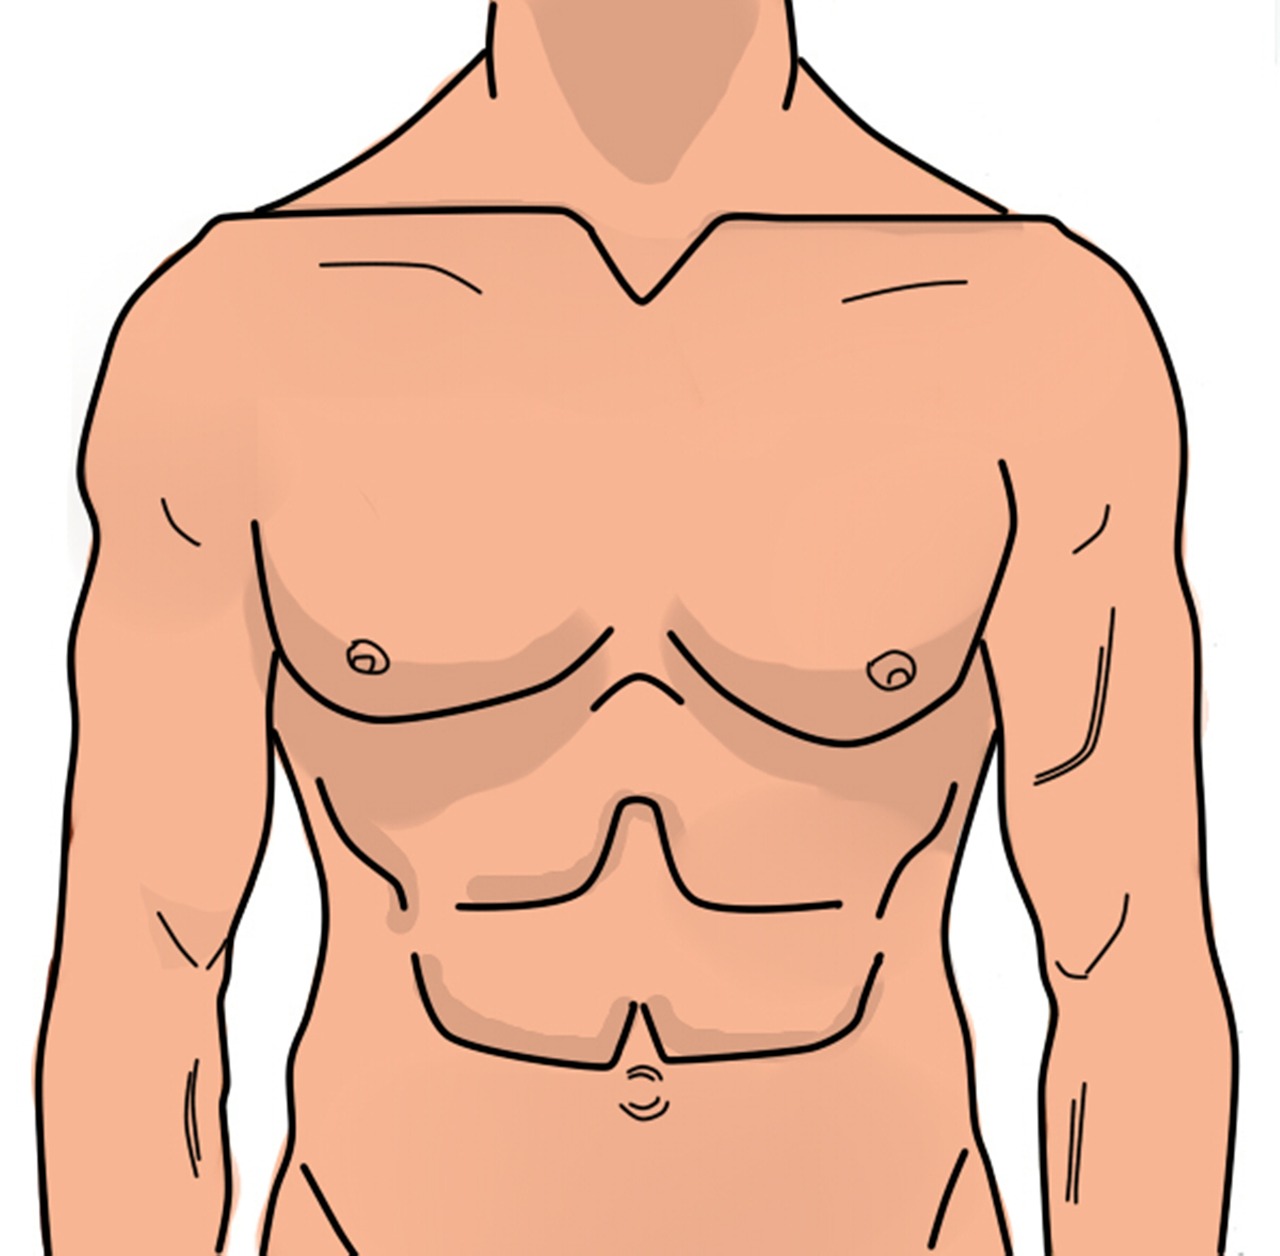 Anatomy,man,abdomen,illustration,free pictures free image from